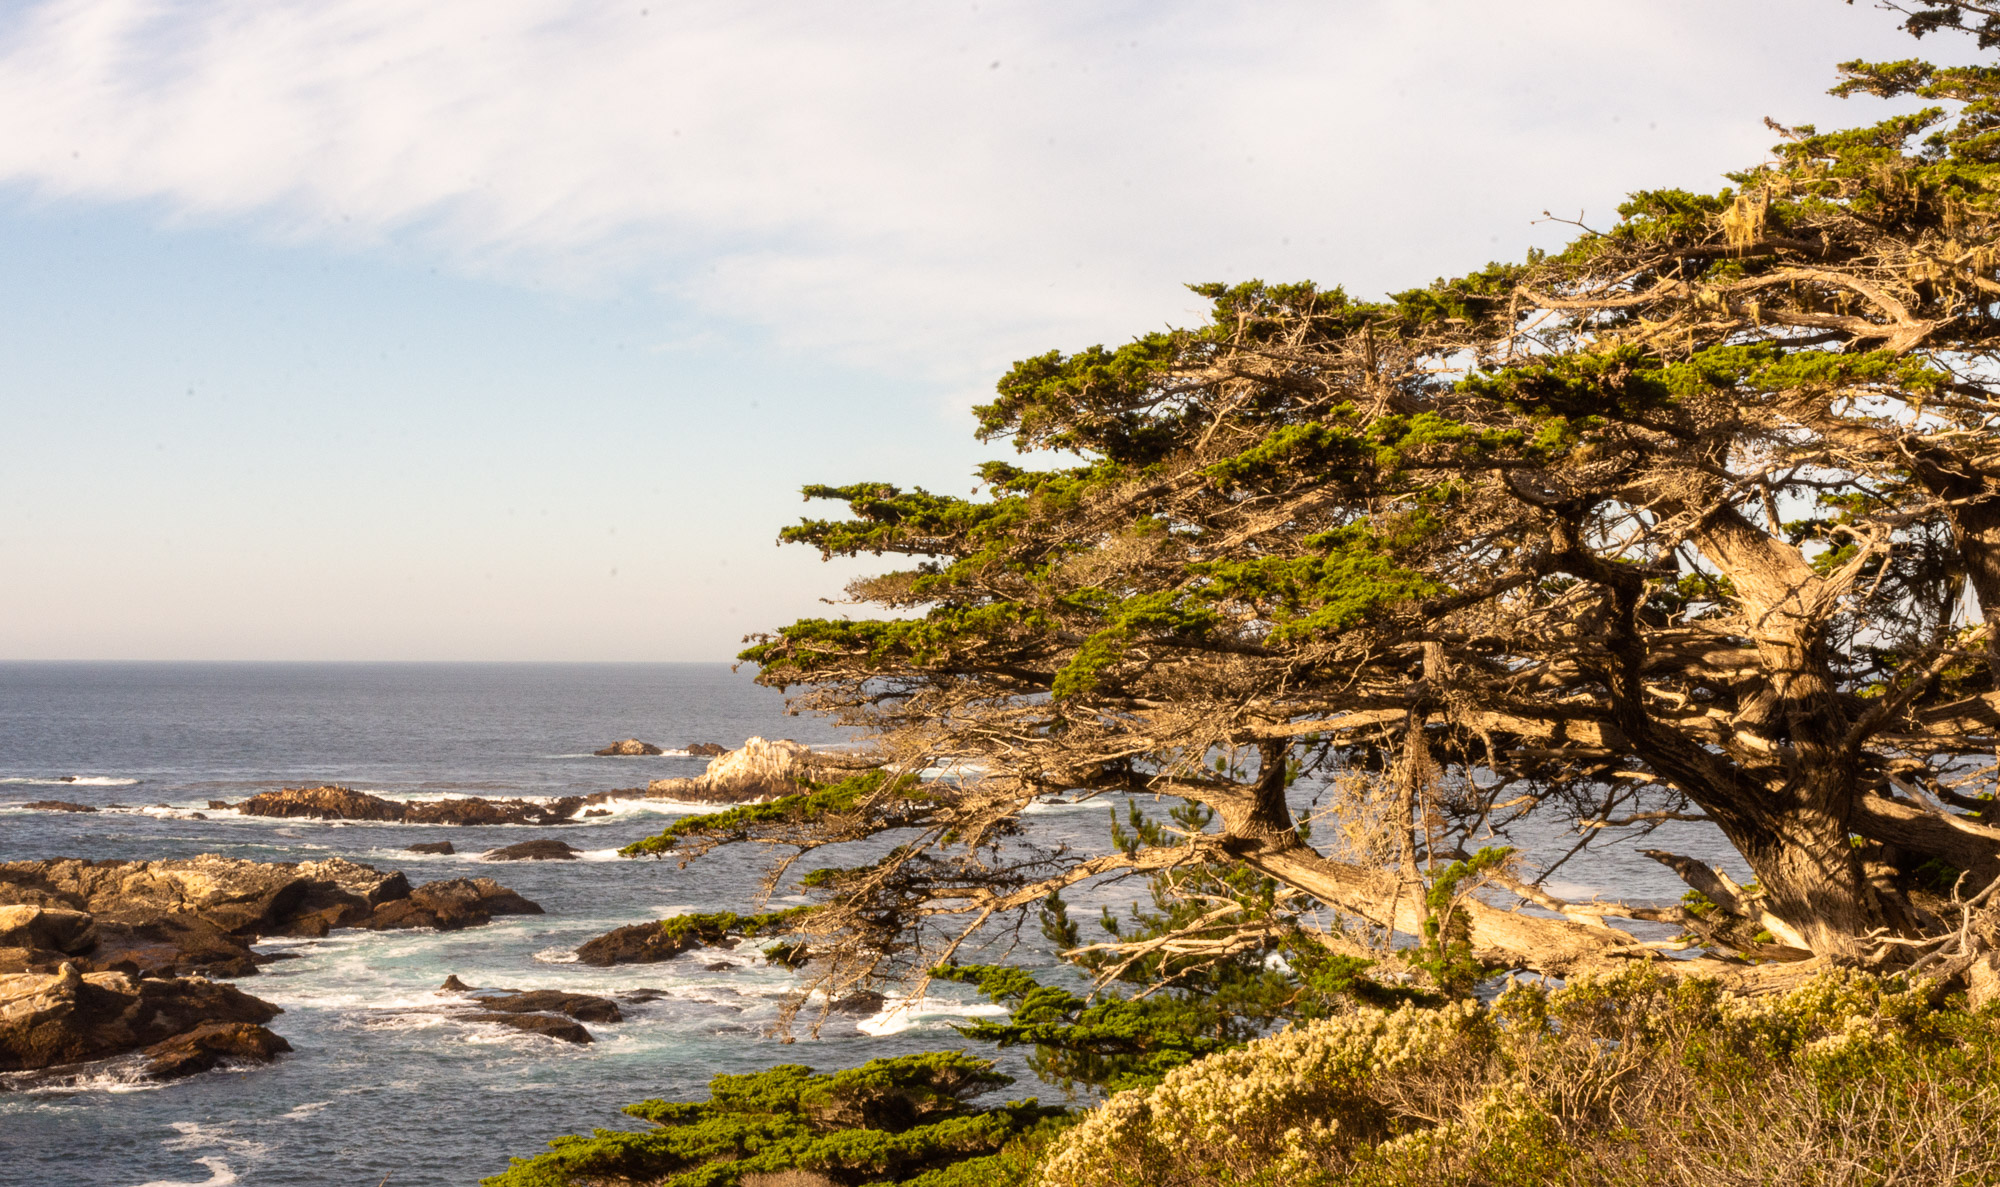 These Monterey cypress cling to the rocky coast like no other tree can